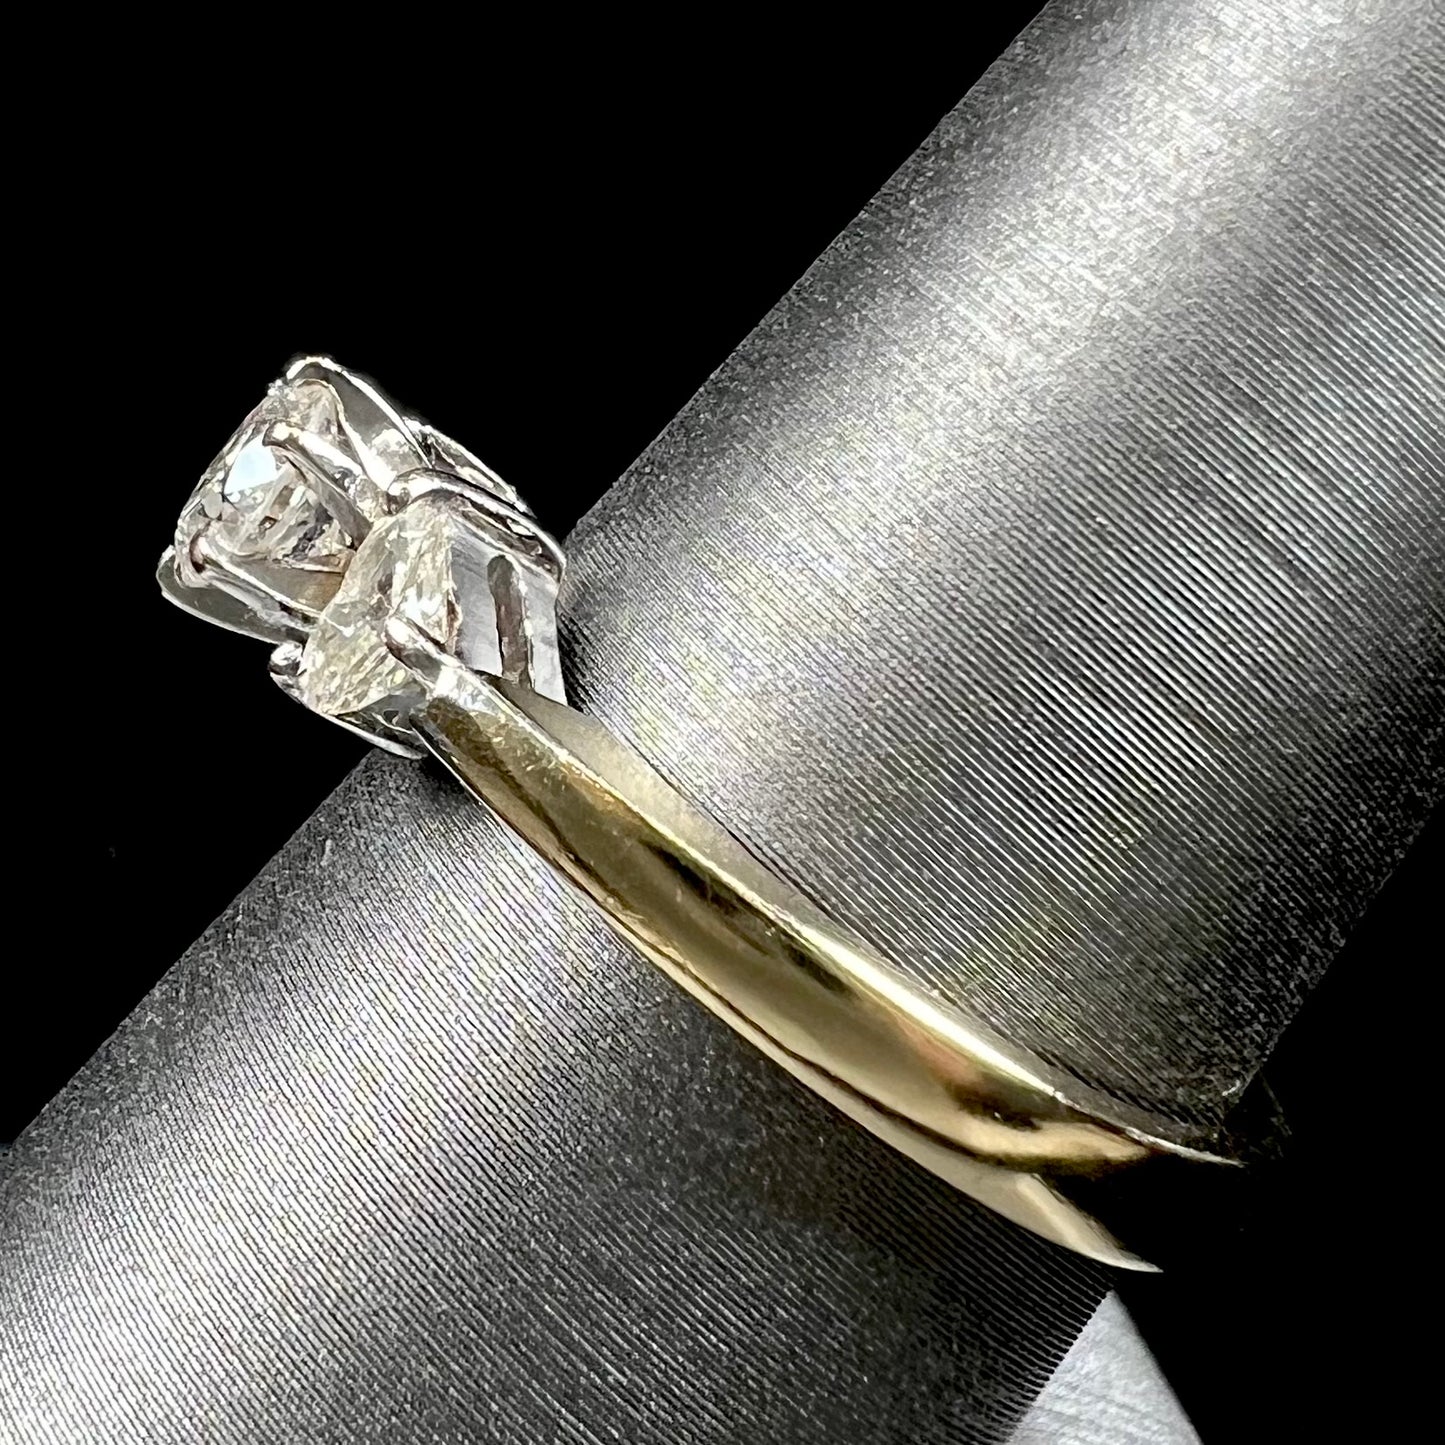 A ladies' three stone diamond ring.  The center diamond is a round brilliant cut, and the two accents are heart shaped diamonds.